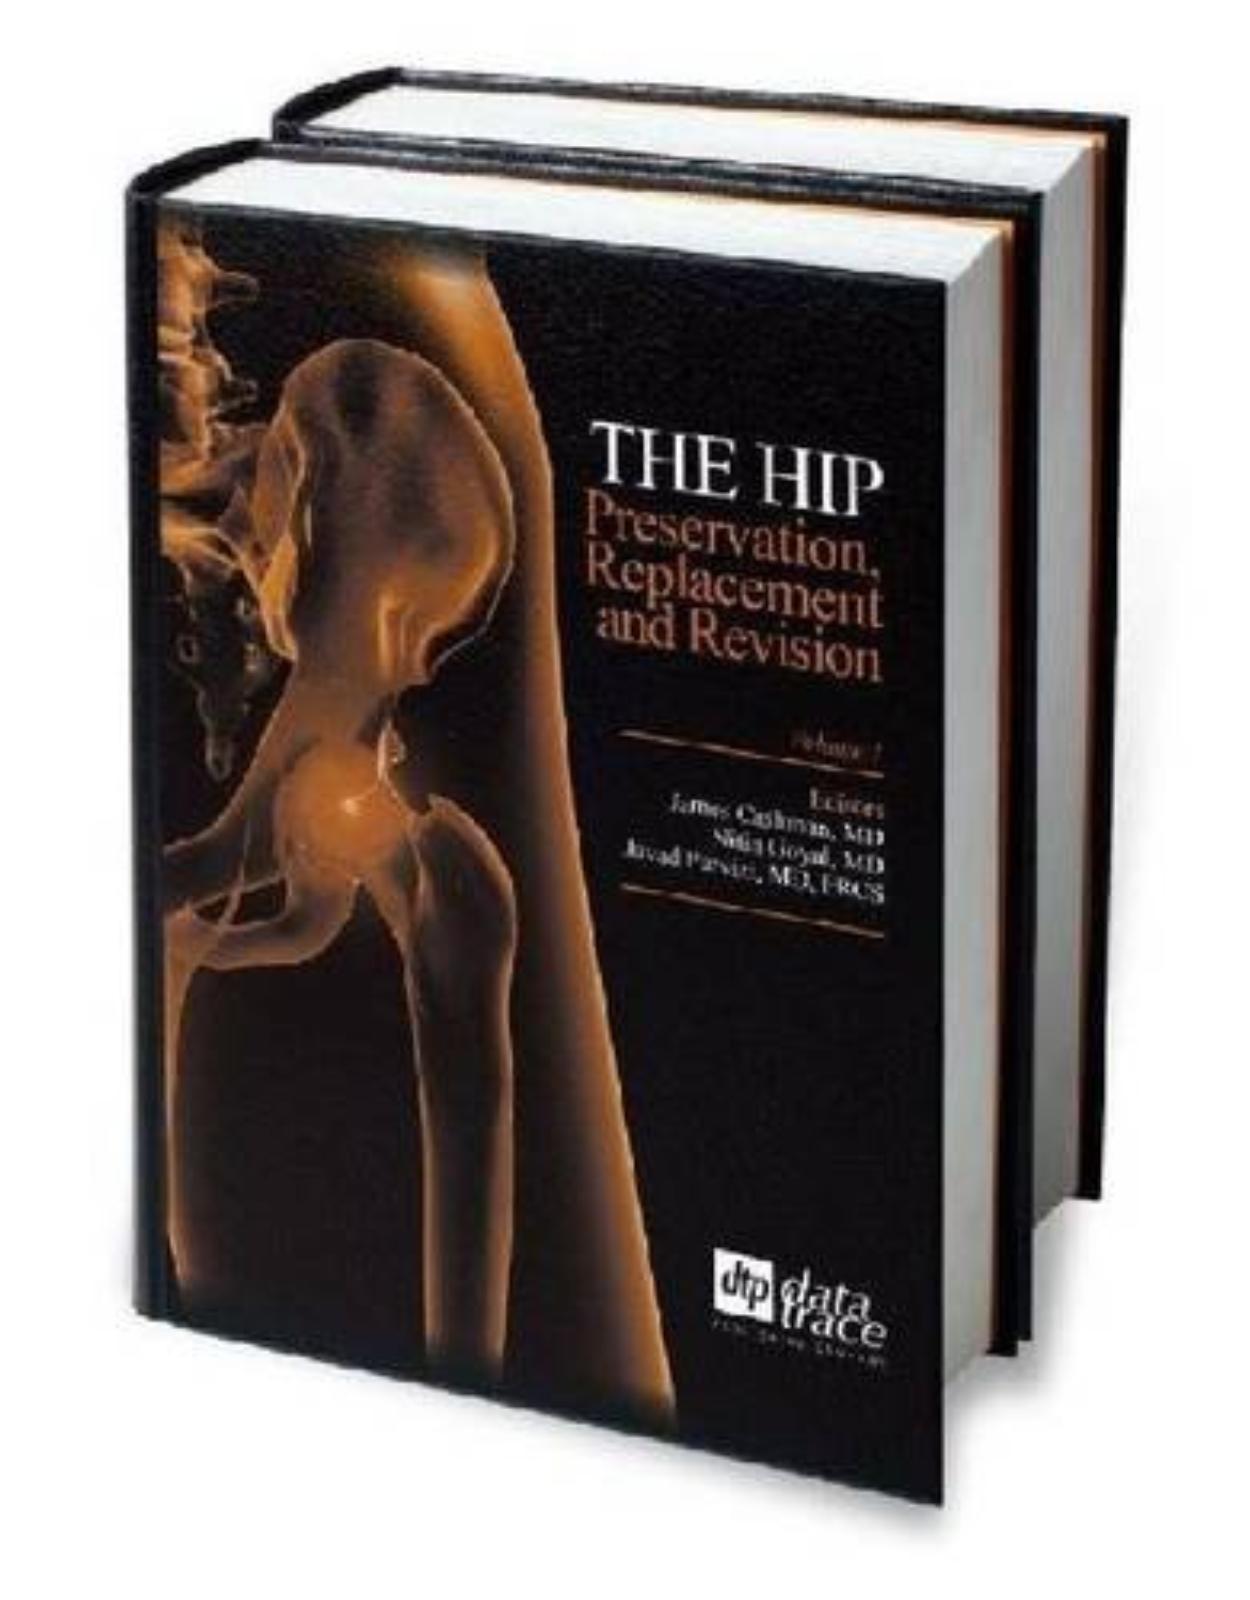 The Hip: Preservation Replacement and Revision